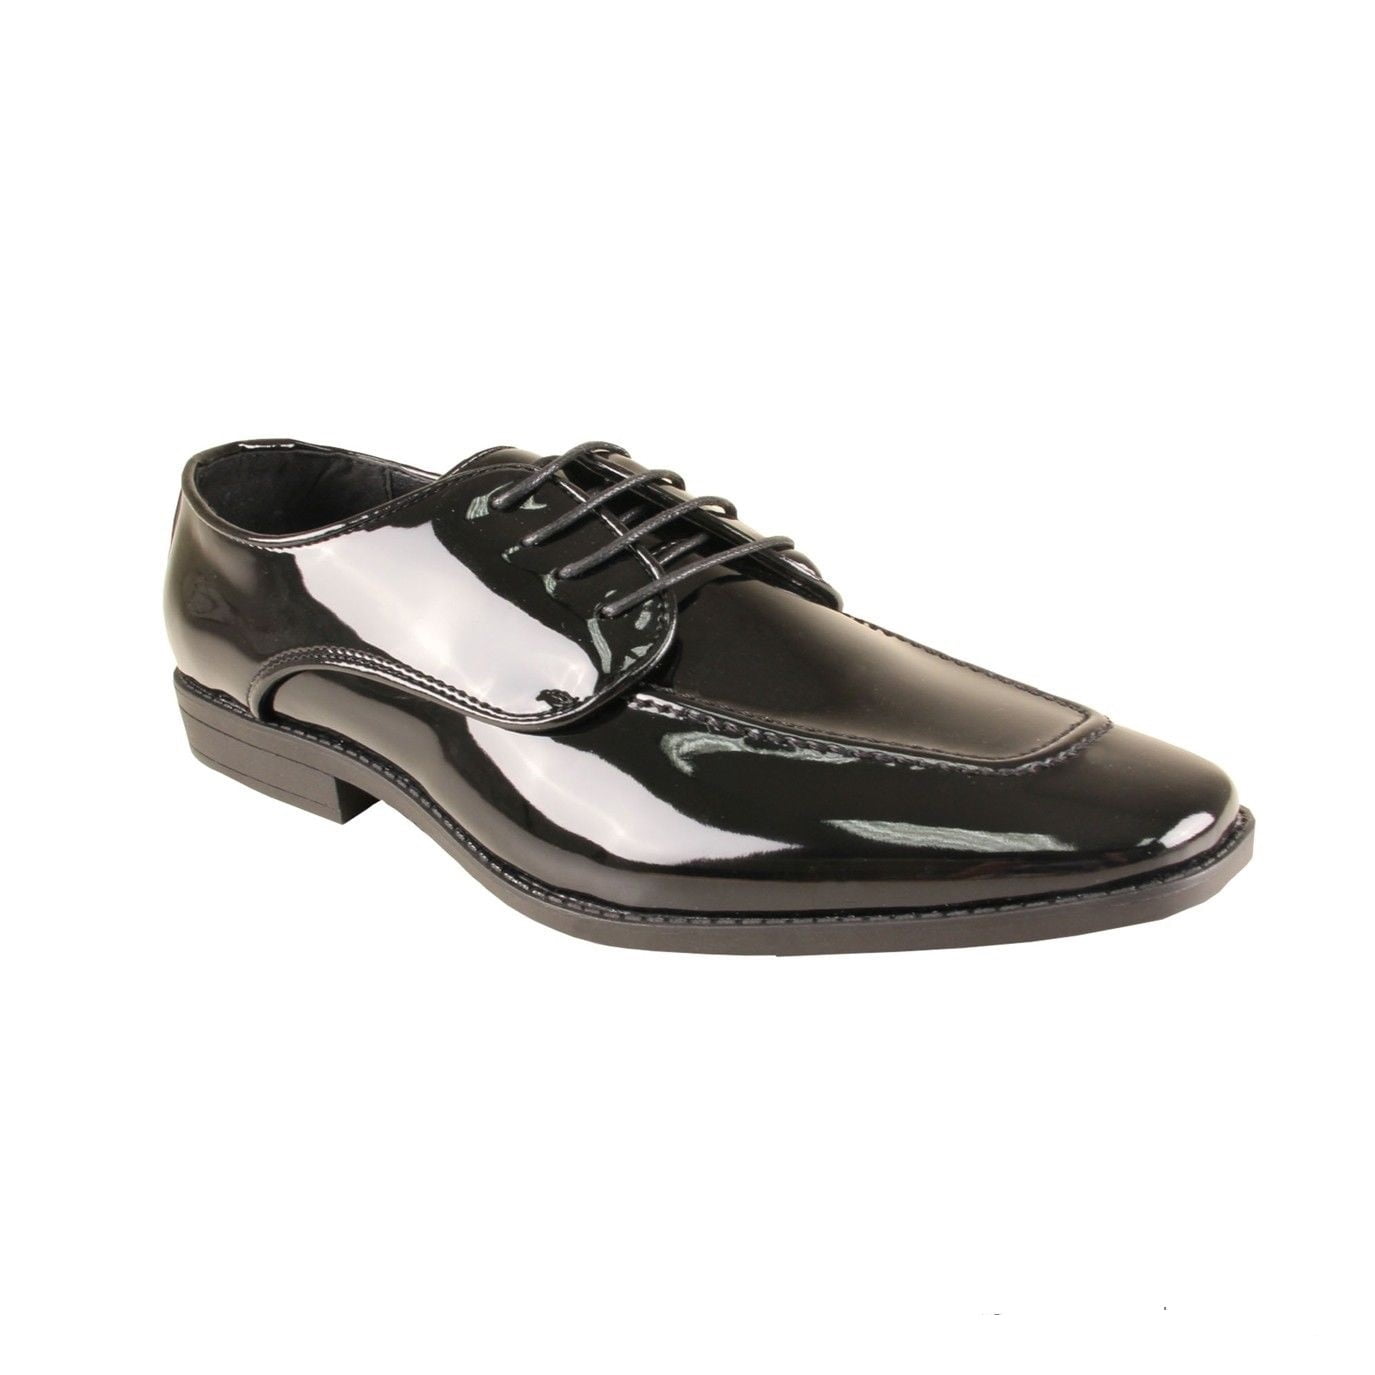 New Men's Dress Tuxedo Shoes Black Wing Tip Patent Leather Shiny Lace Up Parrazo 